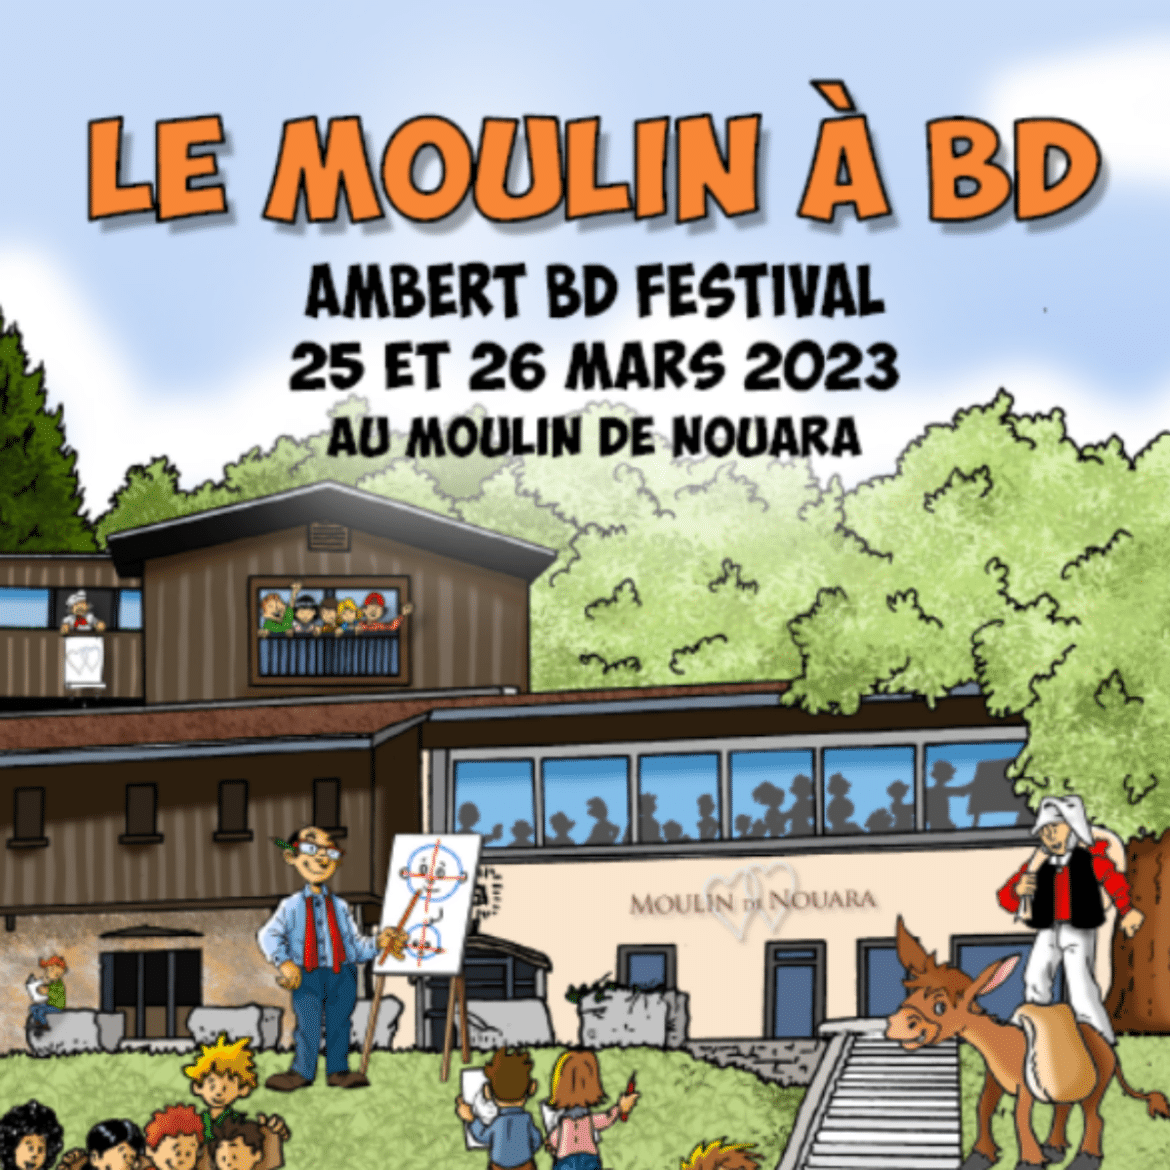 The first edition took place from 28 to 29 March 2023 at the Moulin de Nouara. A great success for this first edition which gathered more than 1000 visitors.